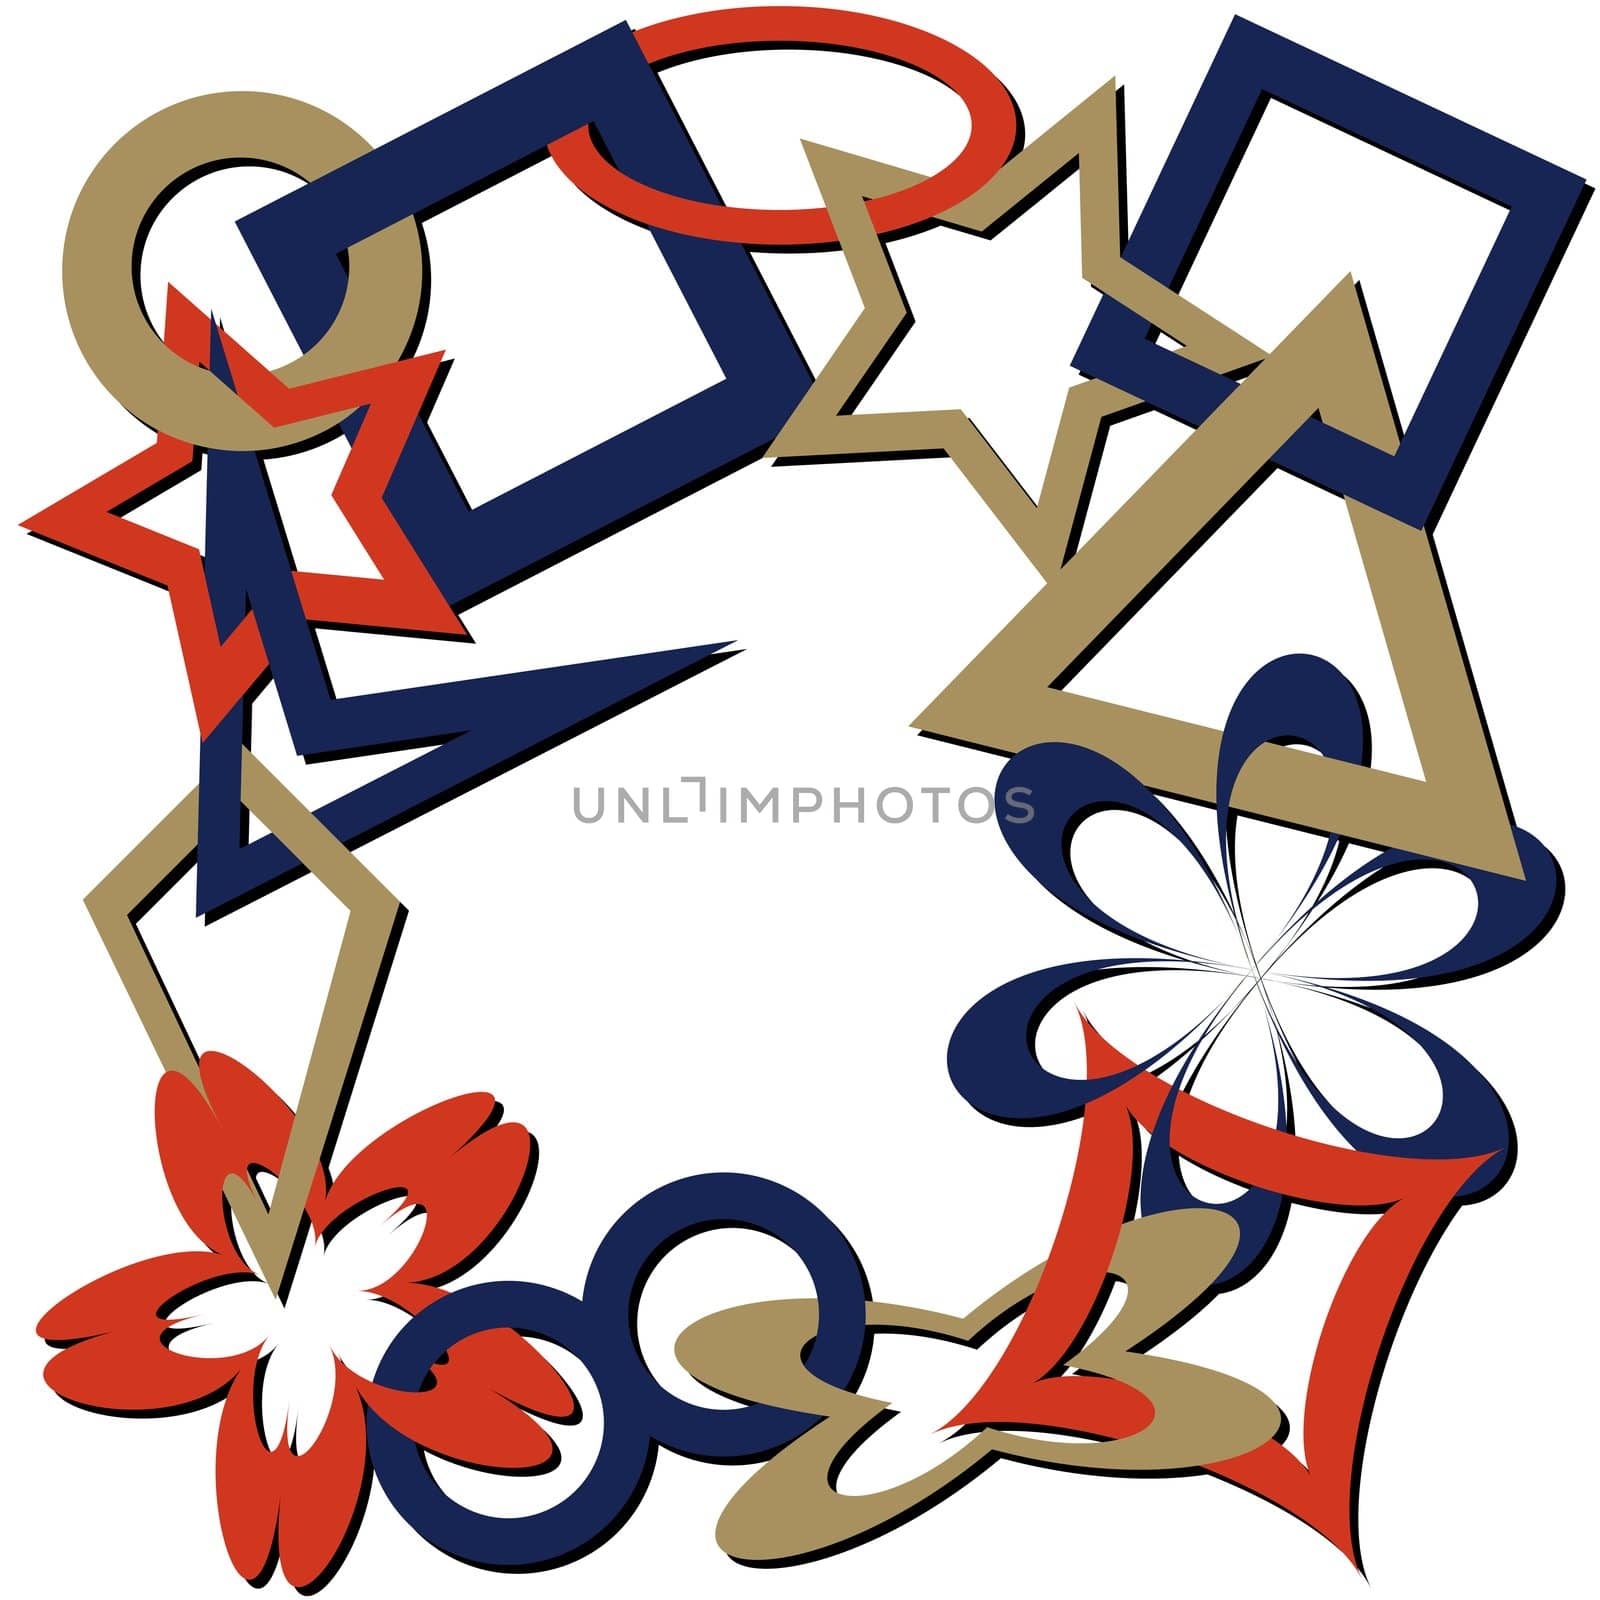 geometric shapes chain with shadows, abstract art illustration